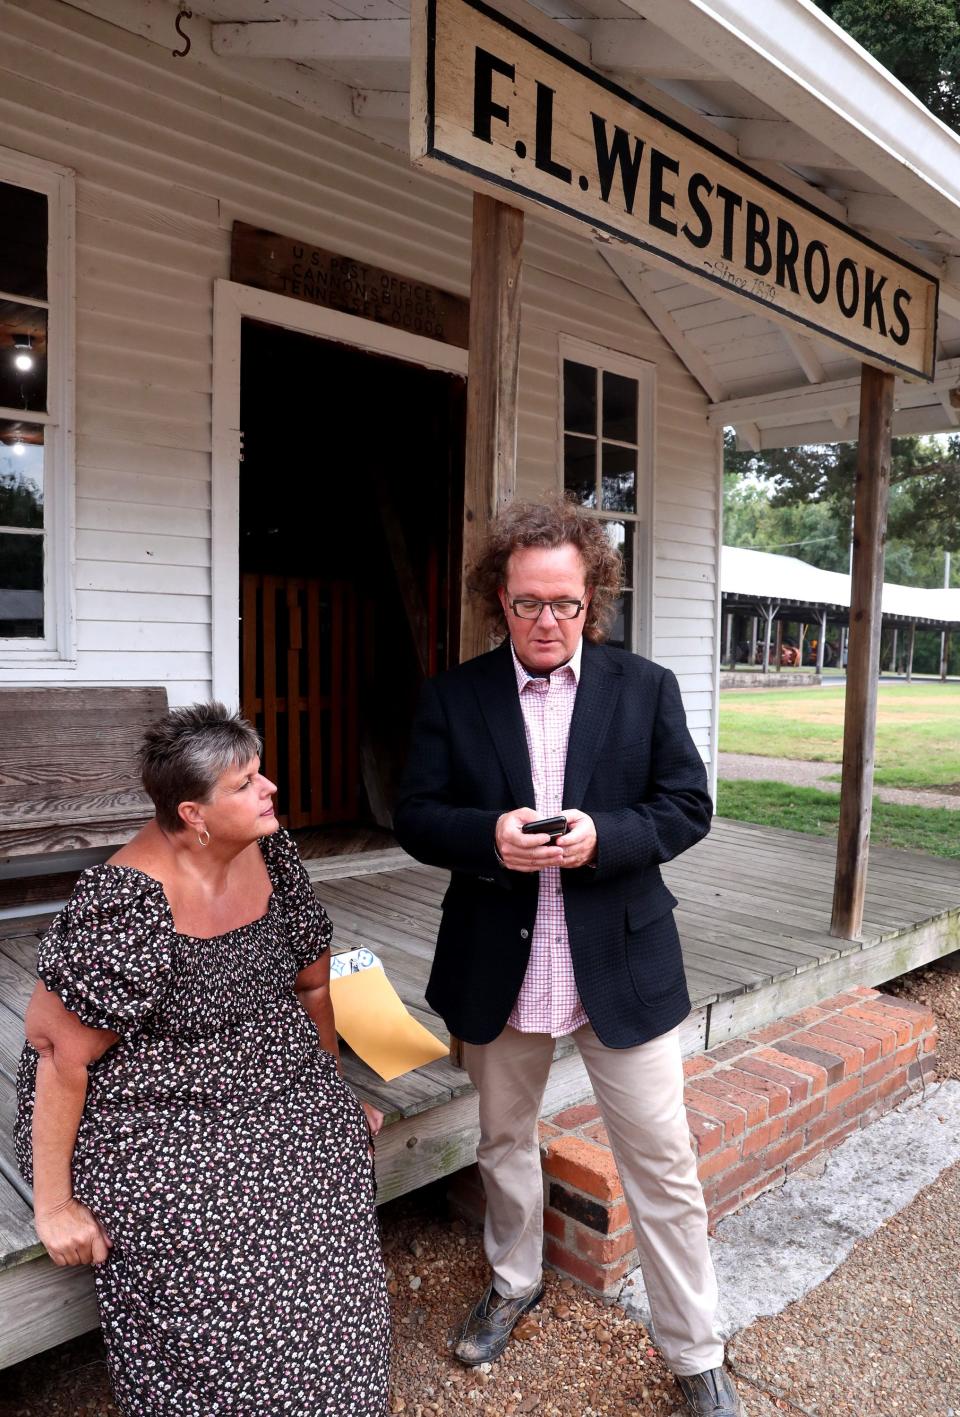 Jason Rose, the majority partner of a purposed minor league baseball team that could come to Murfreesboro, signs a petition to save Cannonsburgh Village on the steps of the FL Westbrooks country store at the village on ,Tuesday, Sept. 12, 2023, with the help of Barbara Hudson Fry.